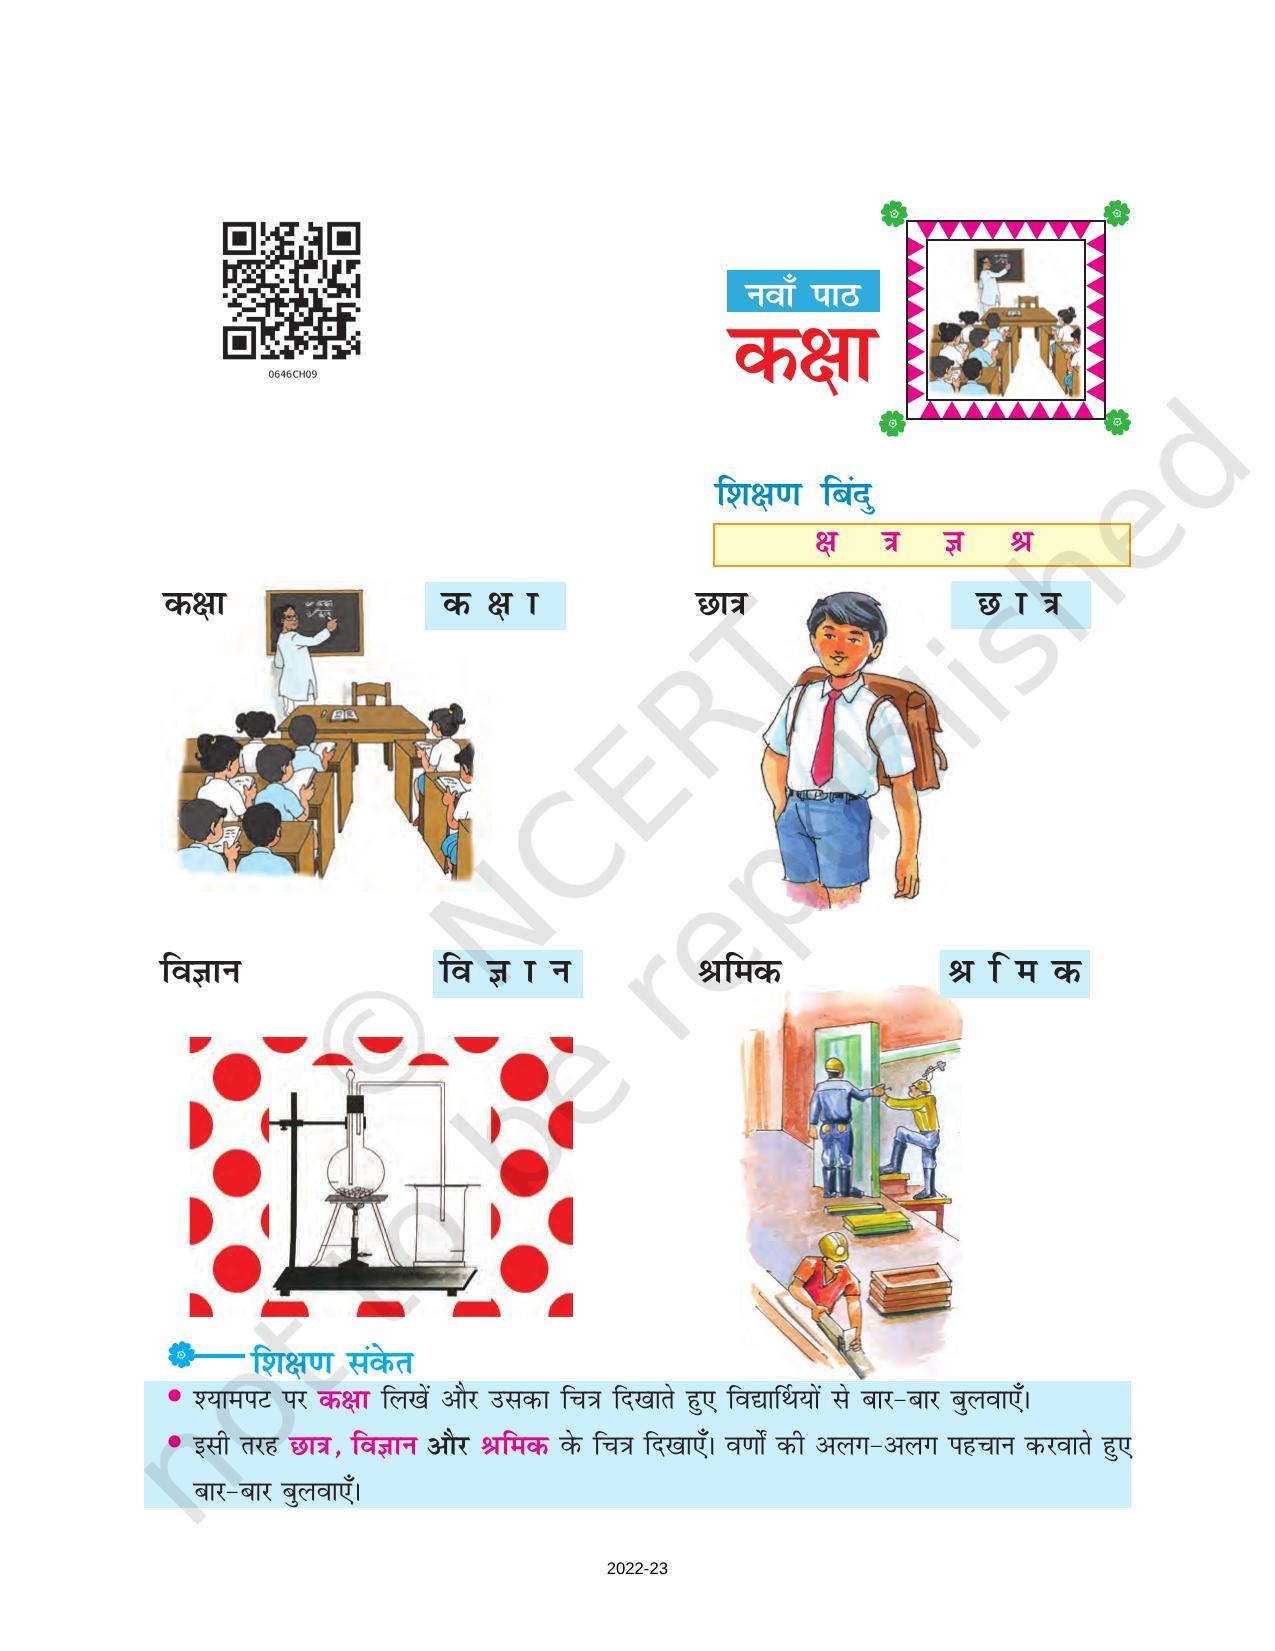 NCERT Book for Class 6 Hindi(Doorva Part 1) : Chapter 9-कक्षा - Page 1